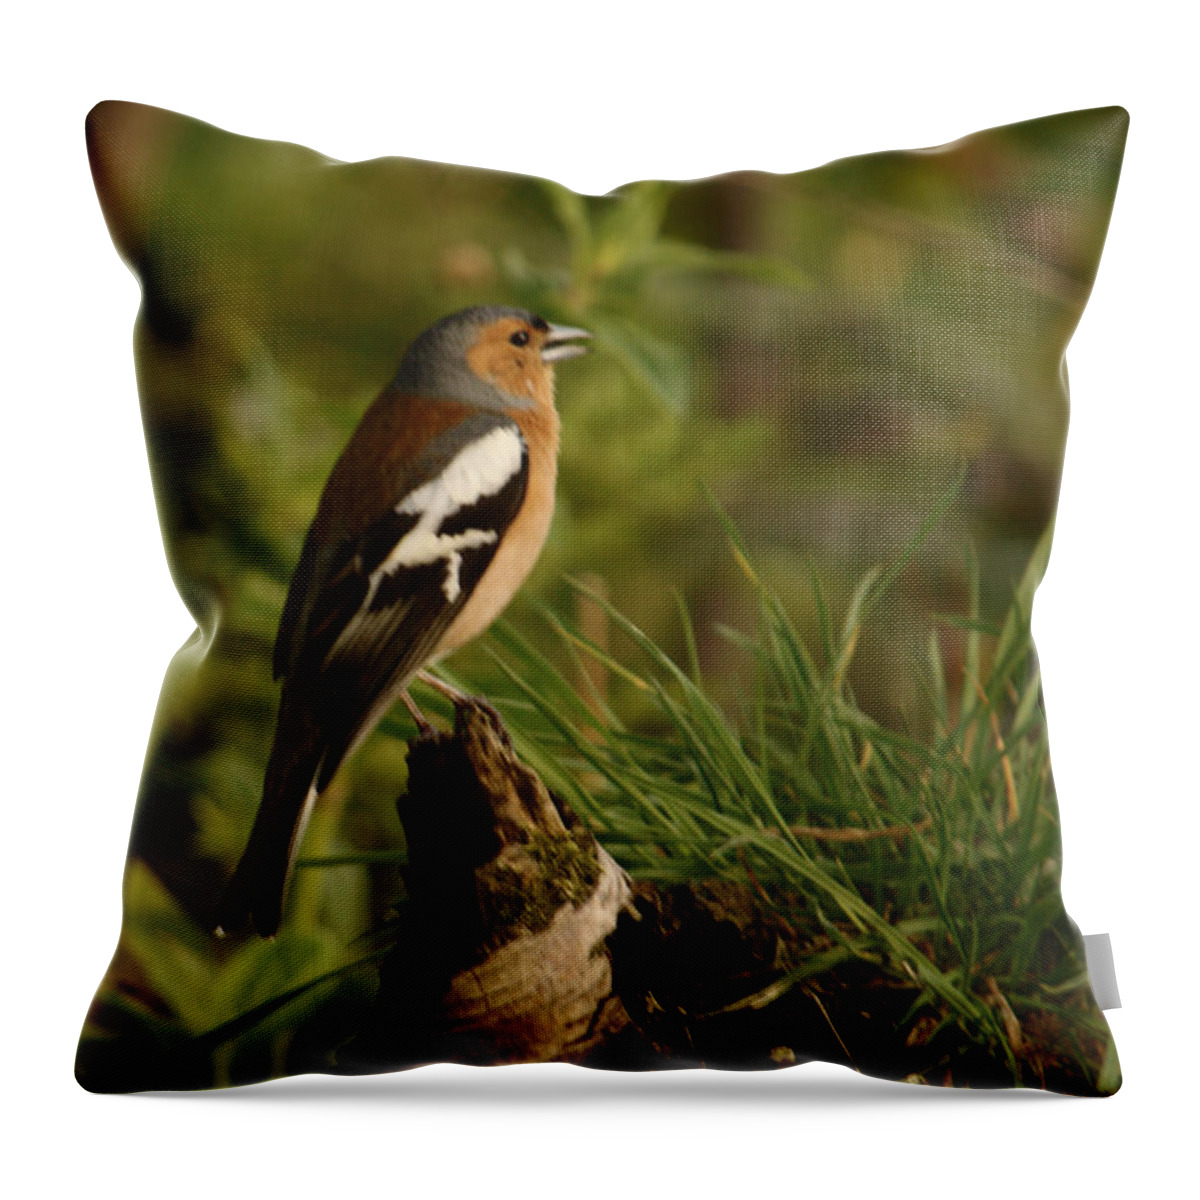 Birds Throw Pillow featuring the photograph Chaffinch On Stump by Adrian Wale